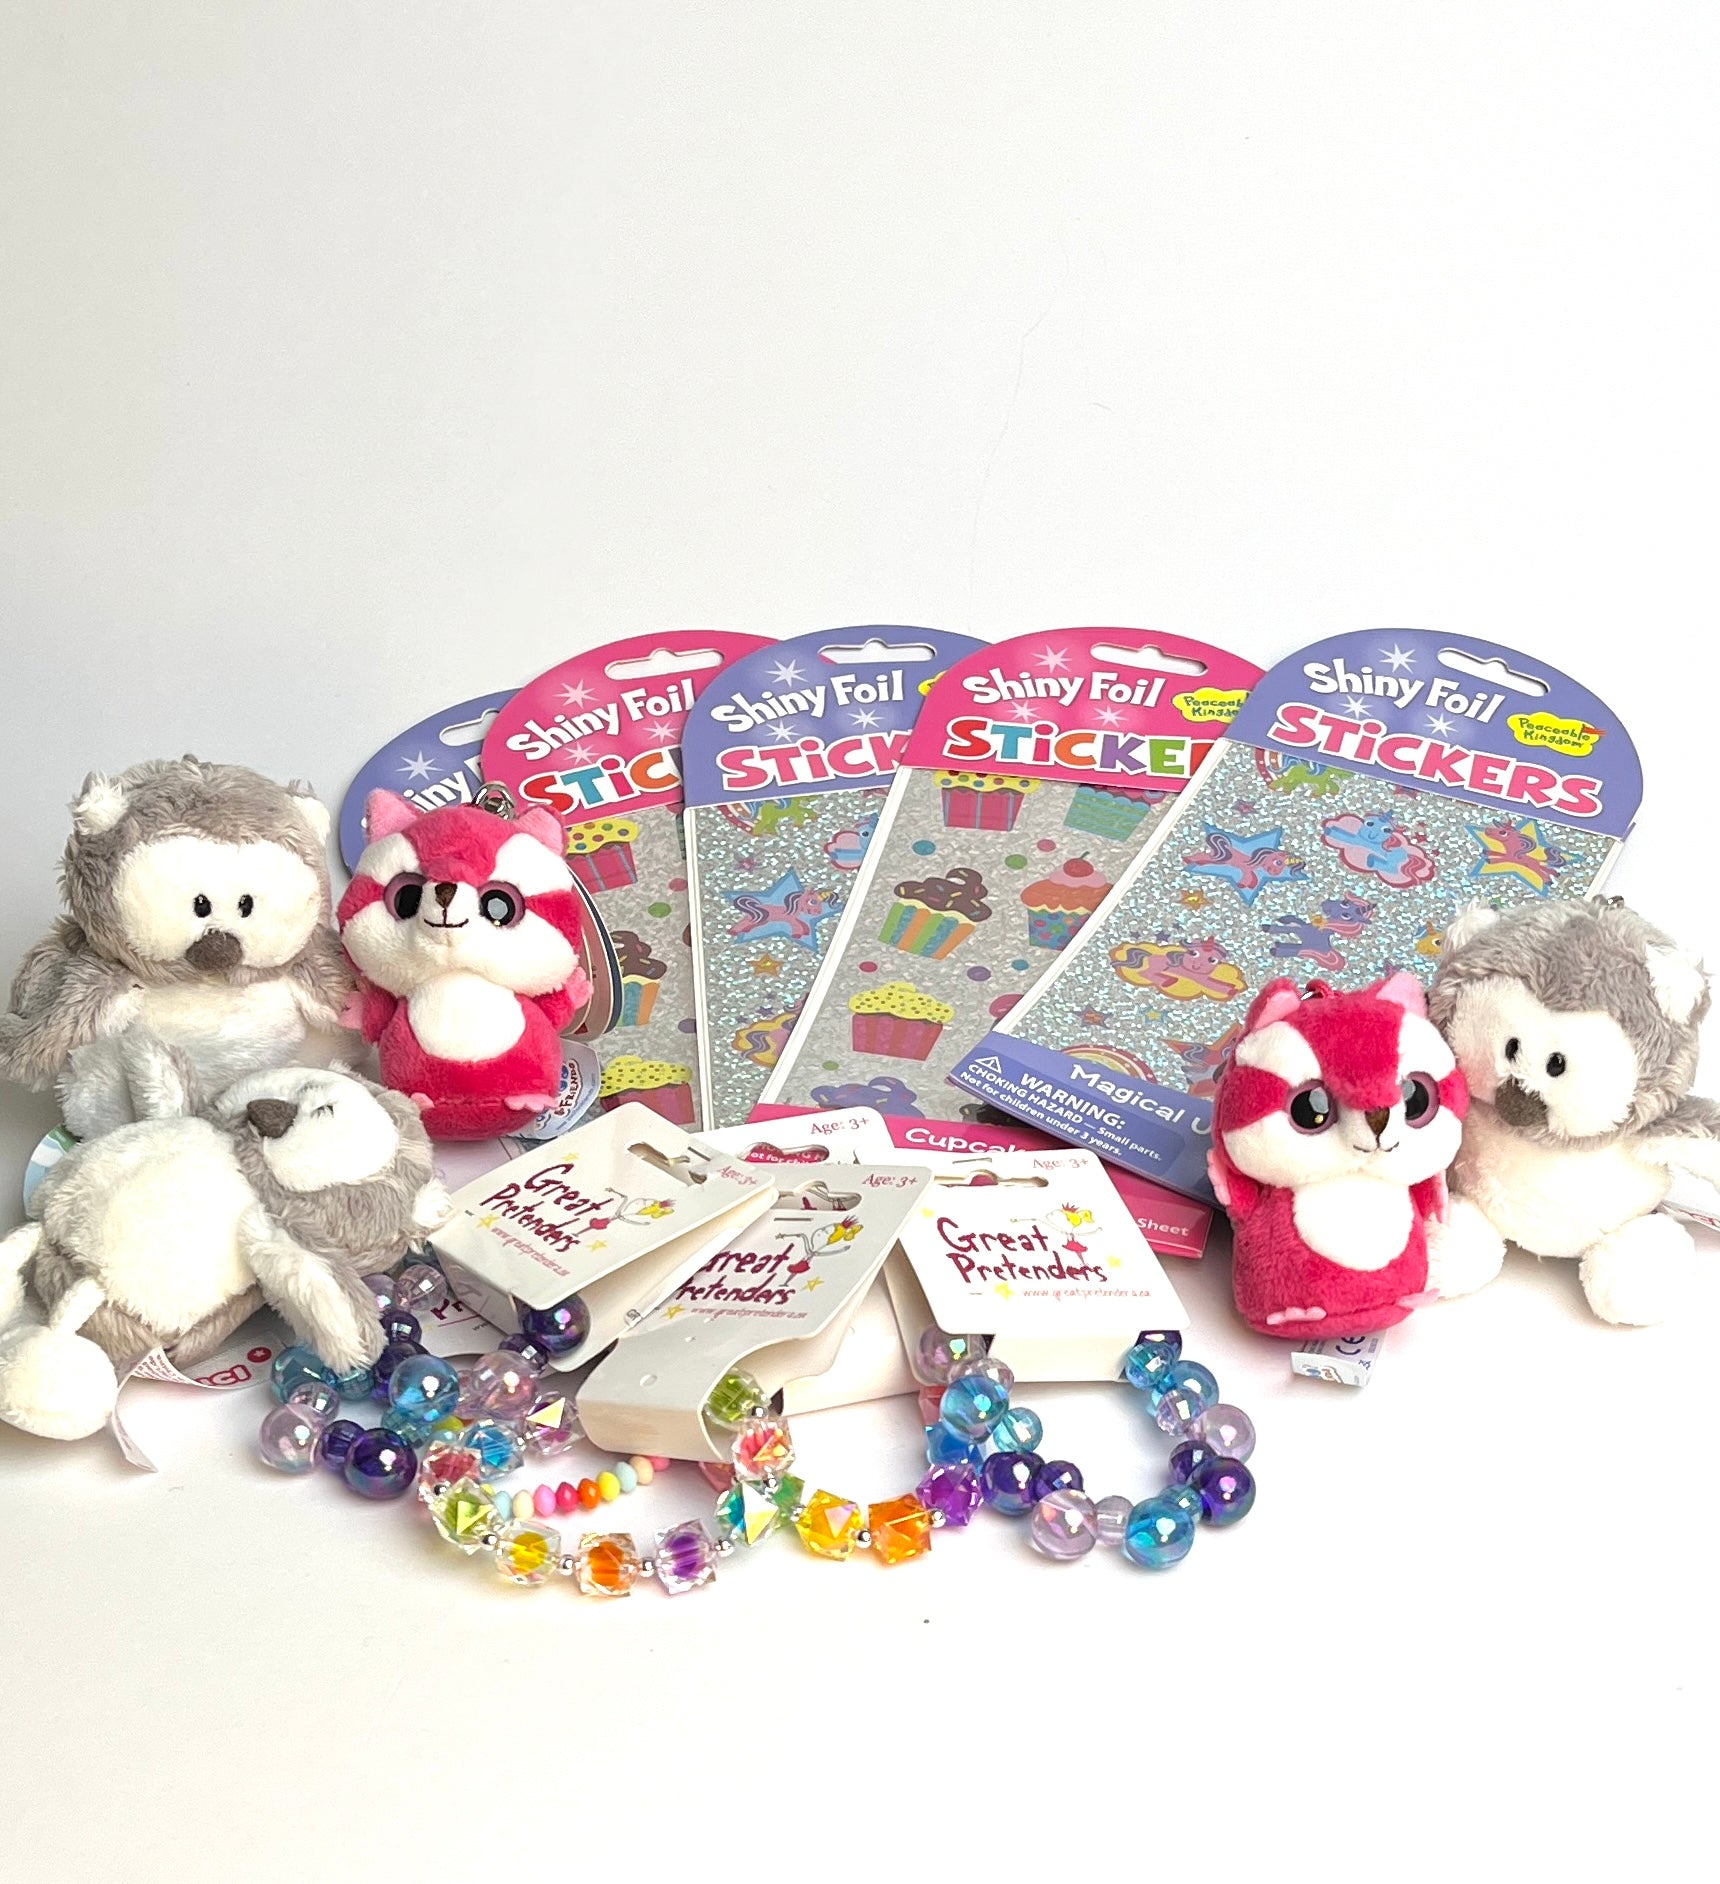 Party Pack - Assorted Girls Gifts for 5 Children